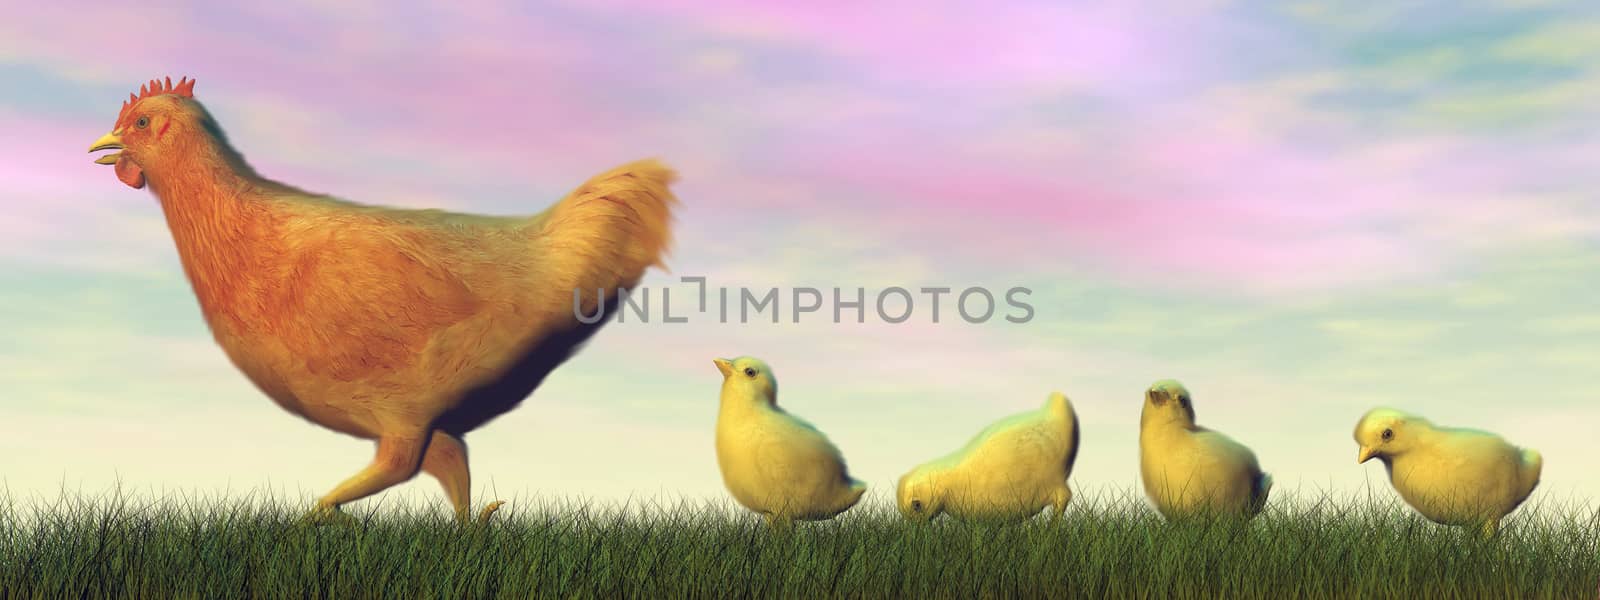 Mother hen walking before cute chick in green grass by sunset